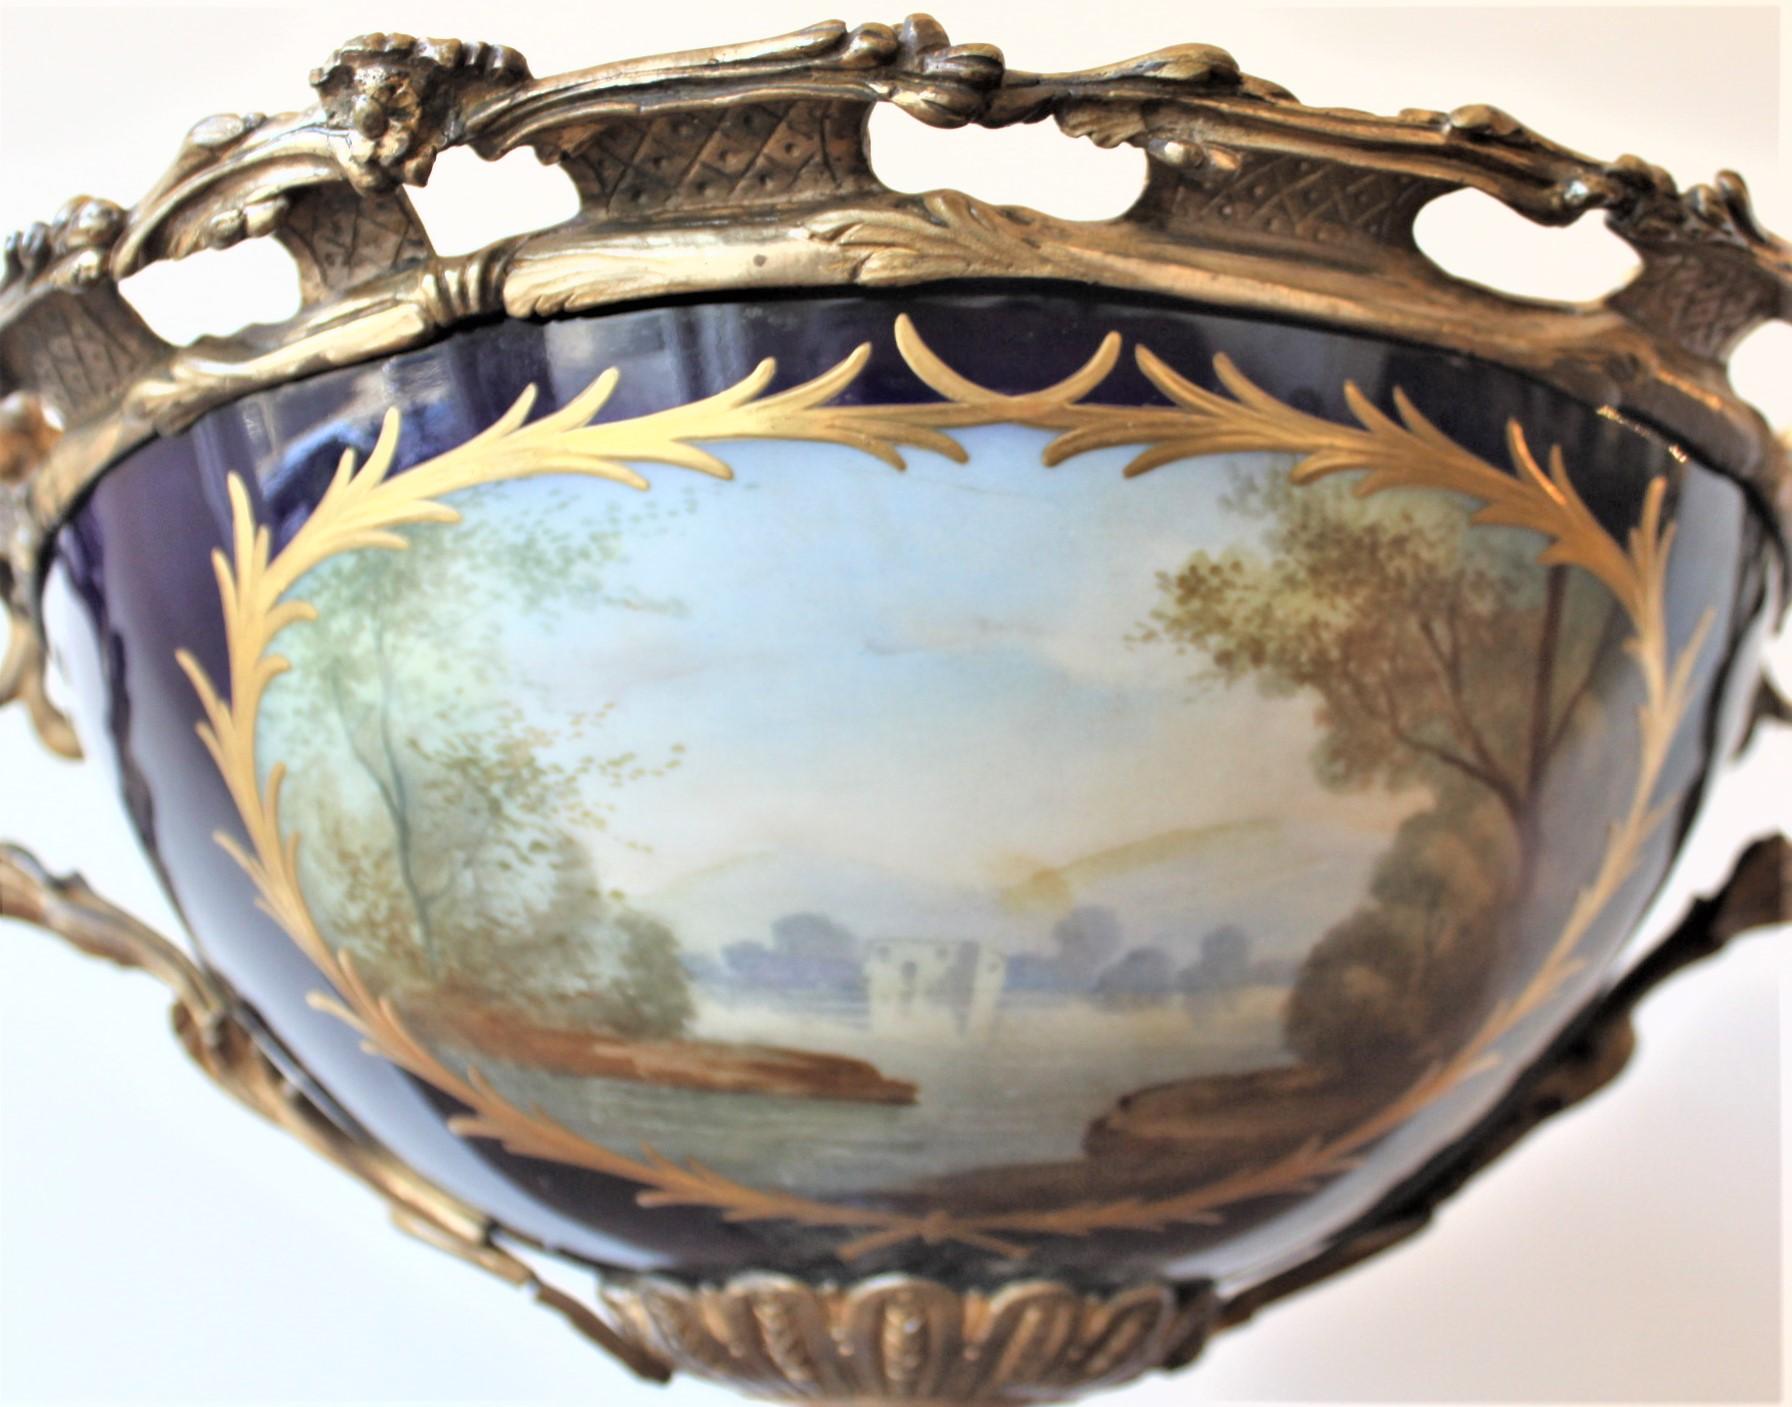 Antique Sevres Ormolu-Mounted and Hand Painted Porcelain Centerpiece or Compote 4